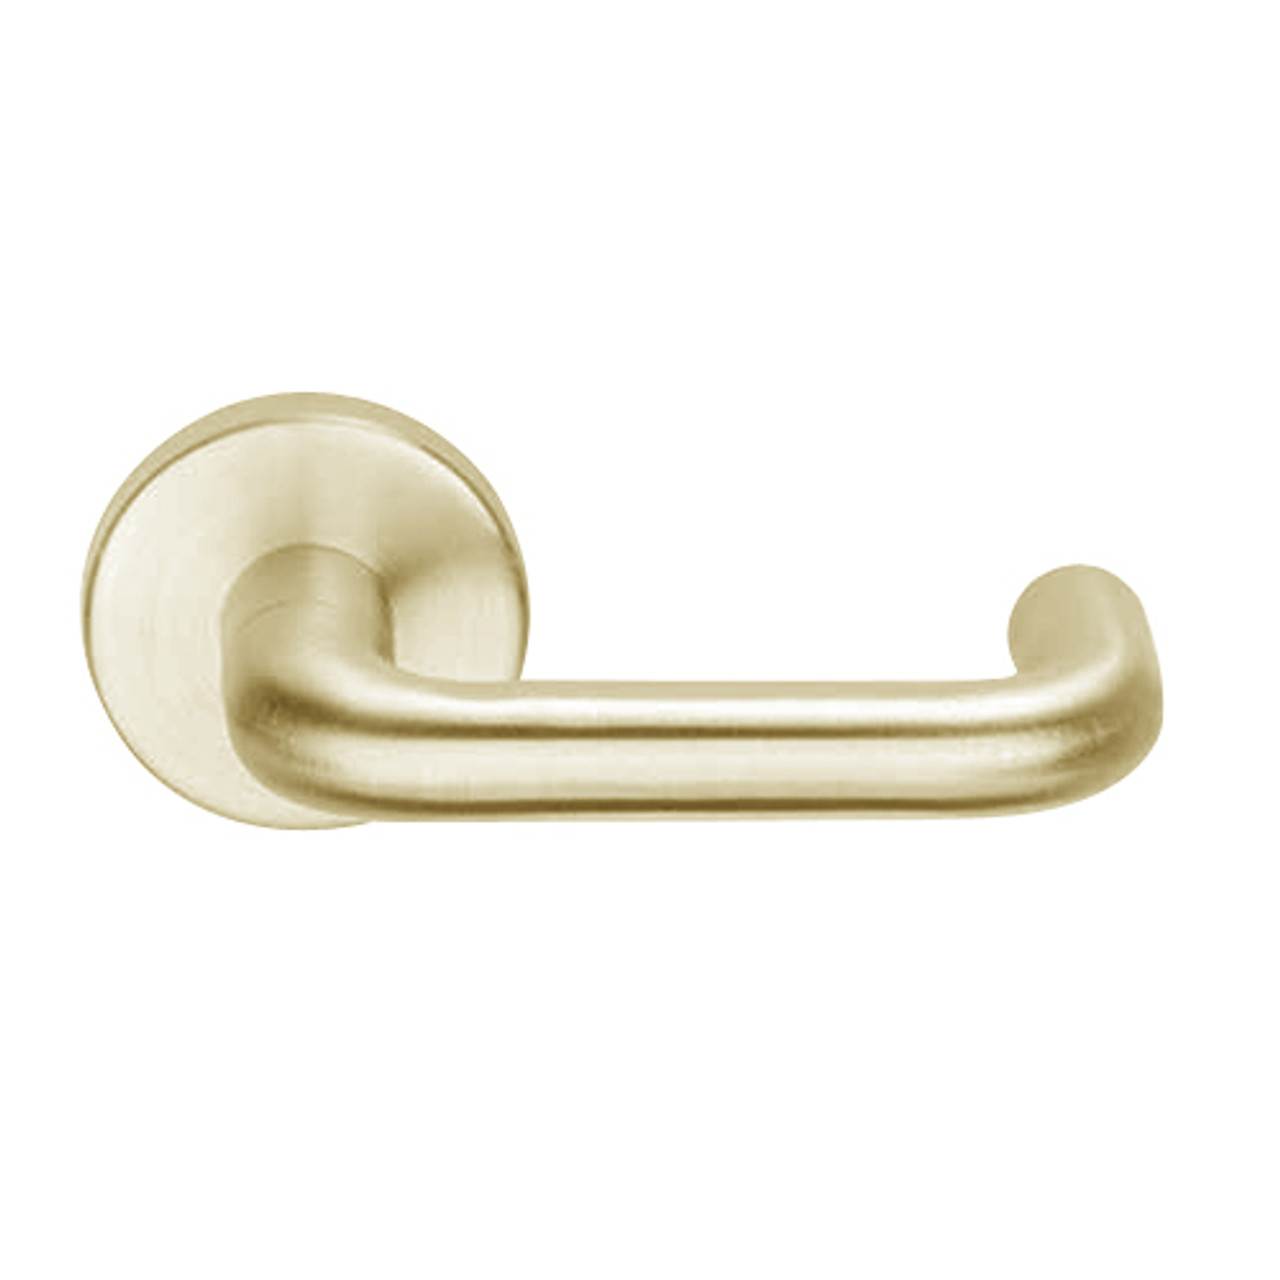 L9050L-03B-606 Schlage L Series Less Cylinder Entrance Commercial Mortise Lock with 03 Cast Lever Design in Satin Brass